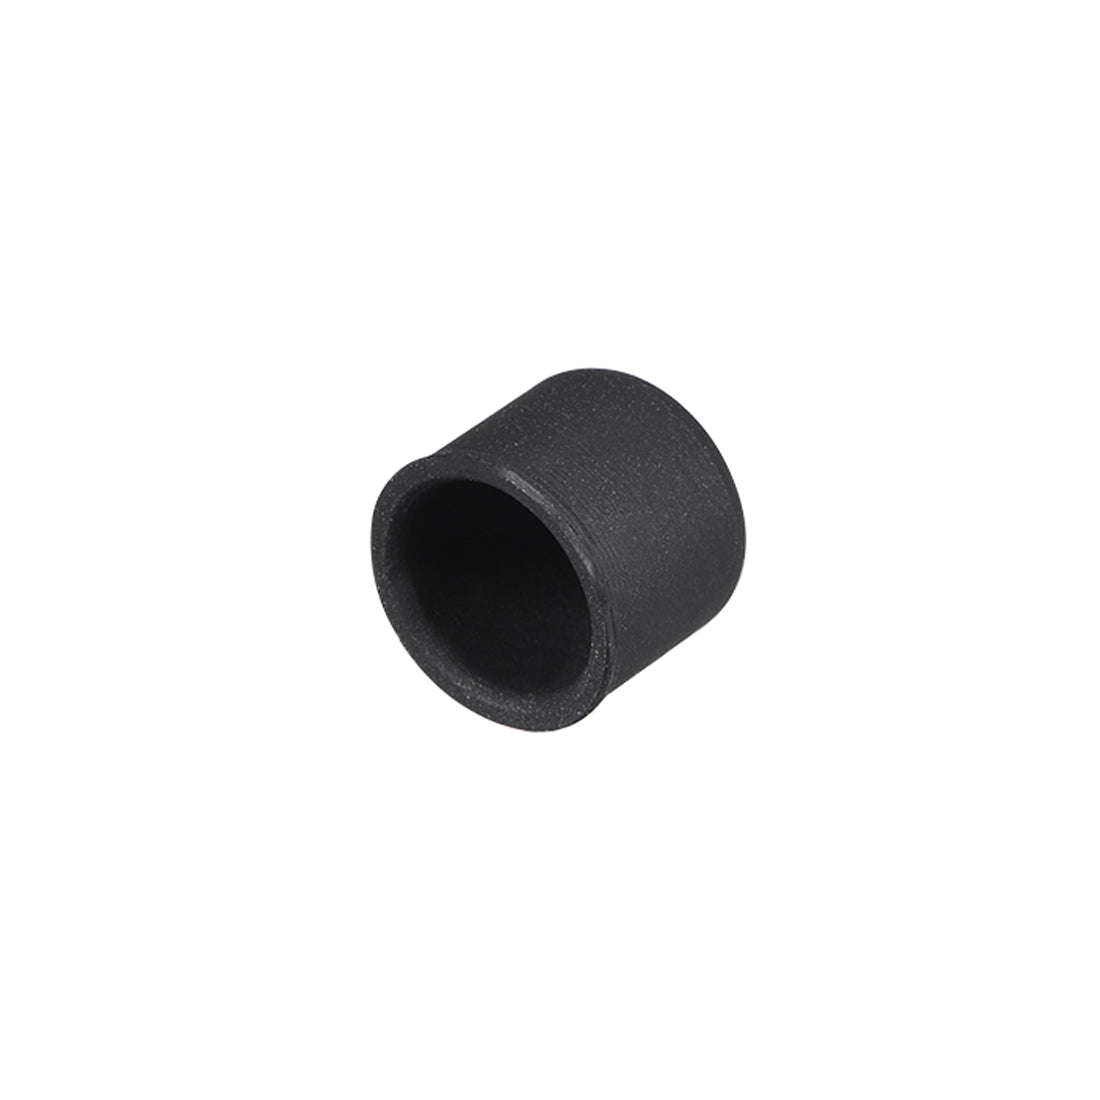 uxcell Uxcell Silicone RCA Port Anti-Dust Stopper Cap Cover Black 20pcs